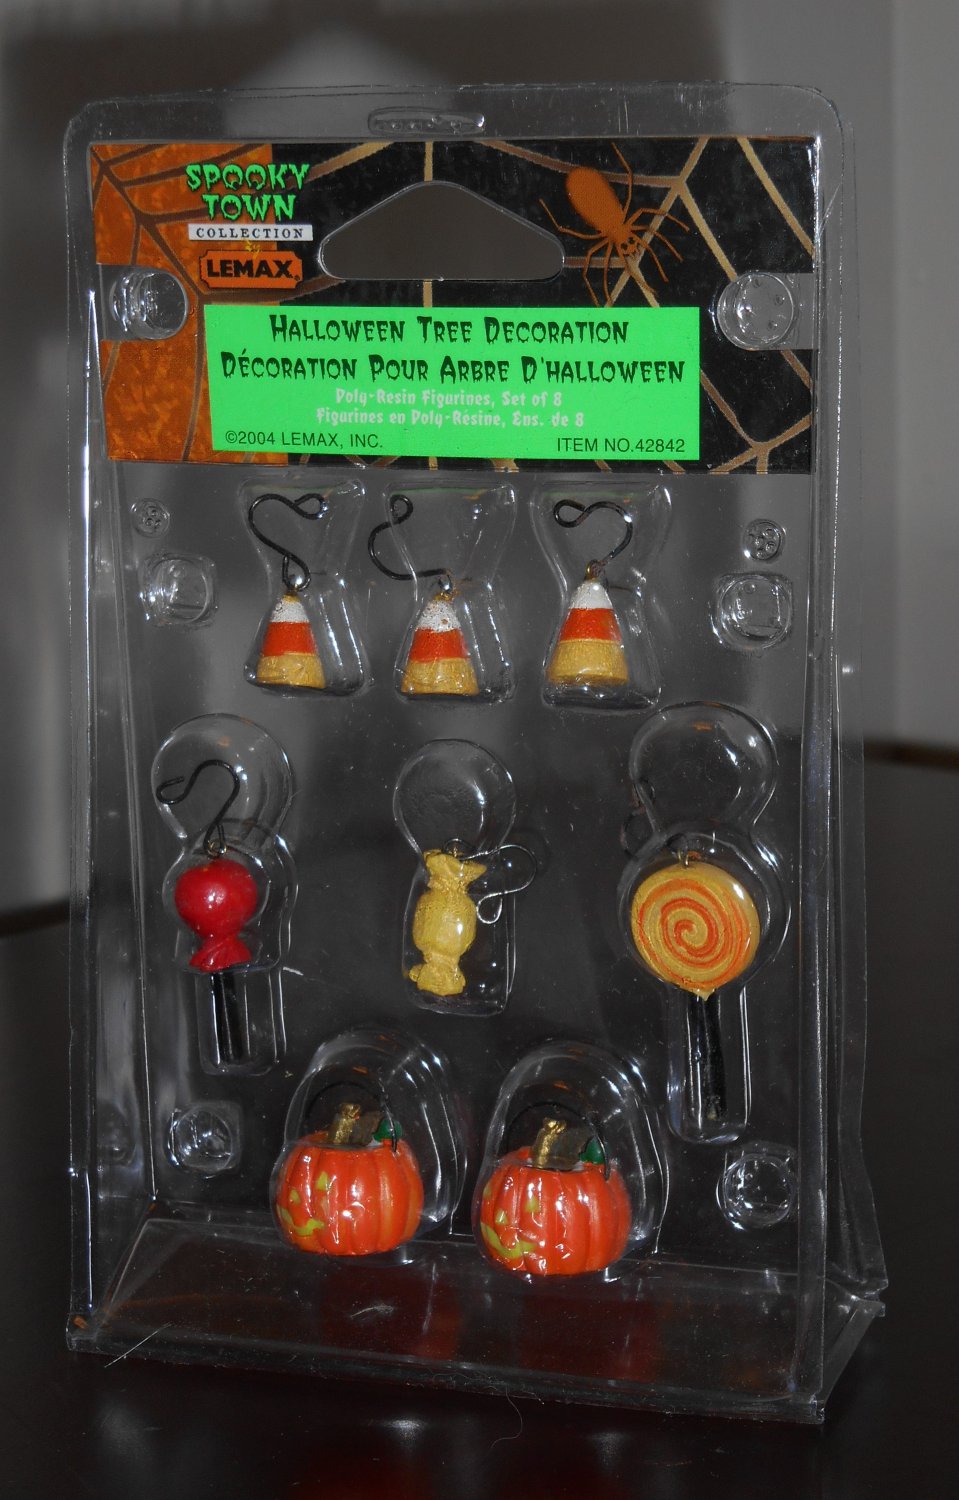 Halloween Tree Decoration Set of 8 Lemax 42842 Candy Corn Lollipop Spooky Town Collection 2004